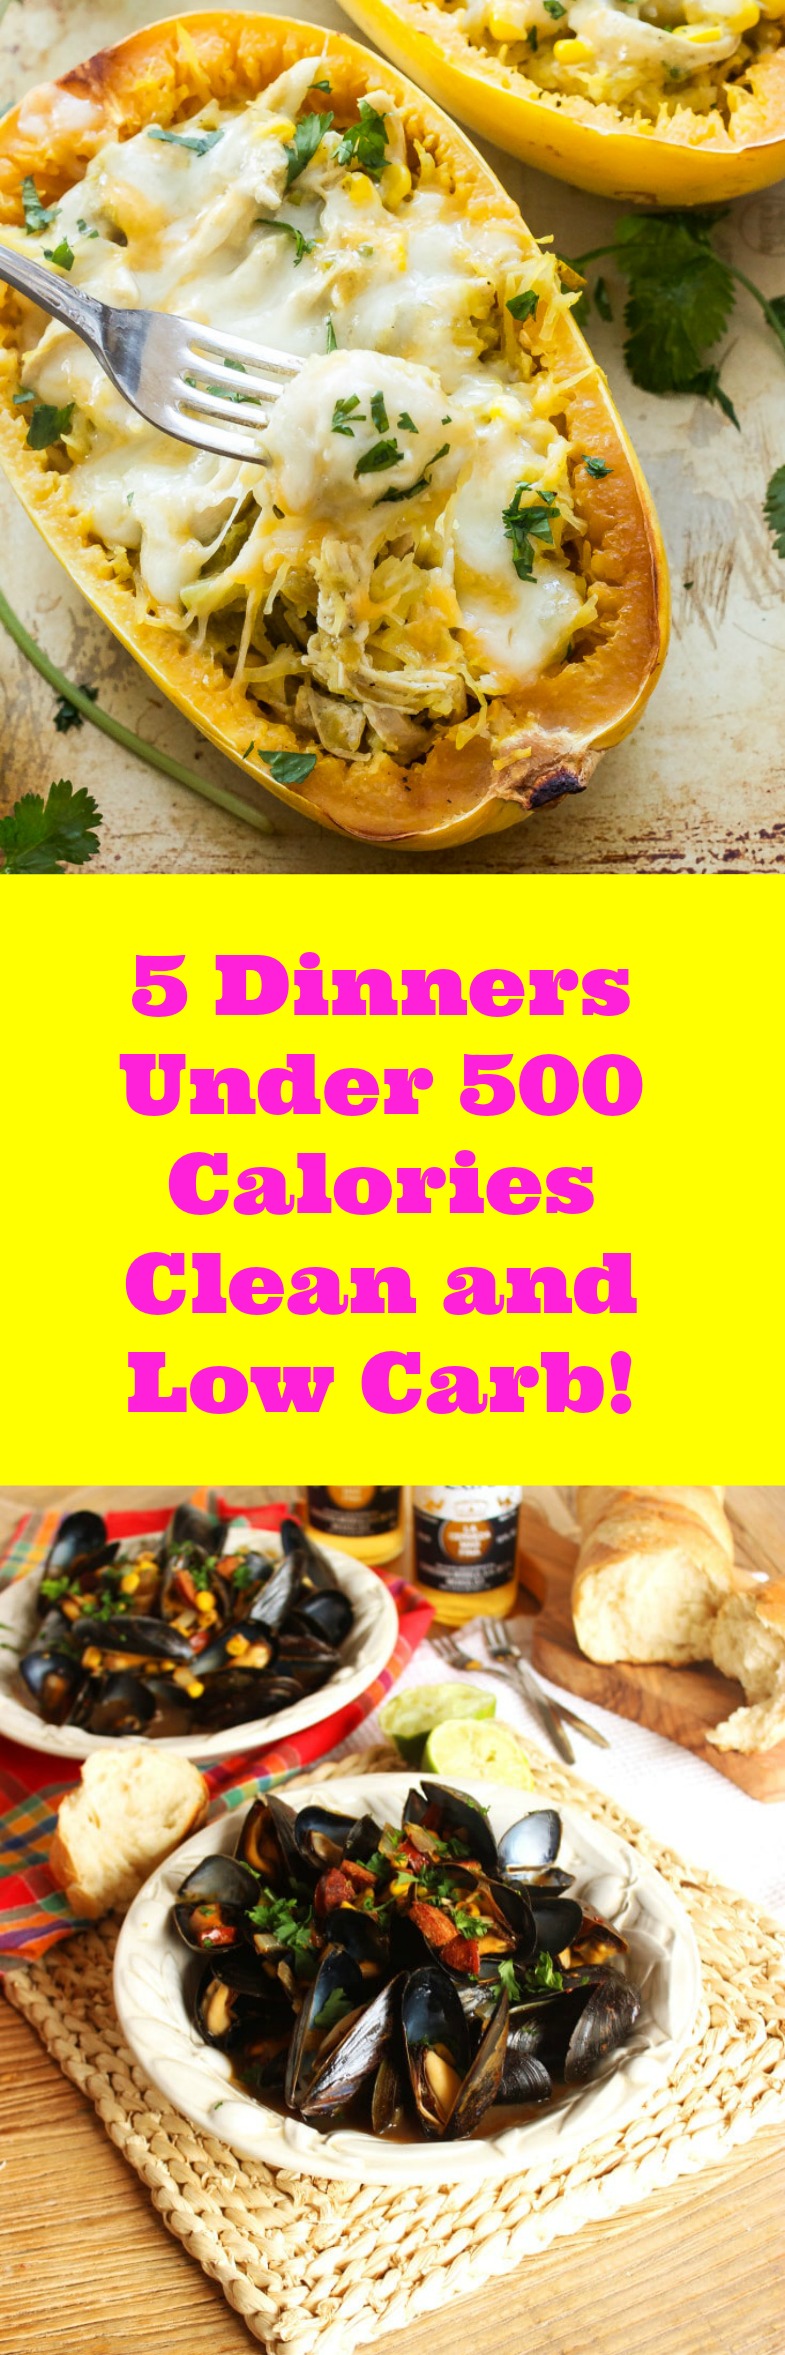 Watching your calorie intake? You will absolutely love these fantastic 5 Healthy Dinners under 500 calories! Now you'll enjoy your dinner with no worries of over eating. Plus surprisingly great taste!